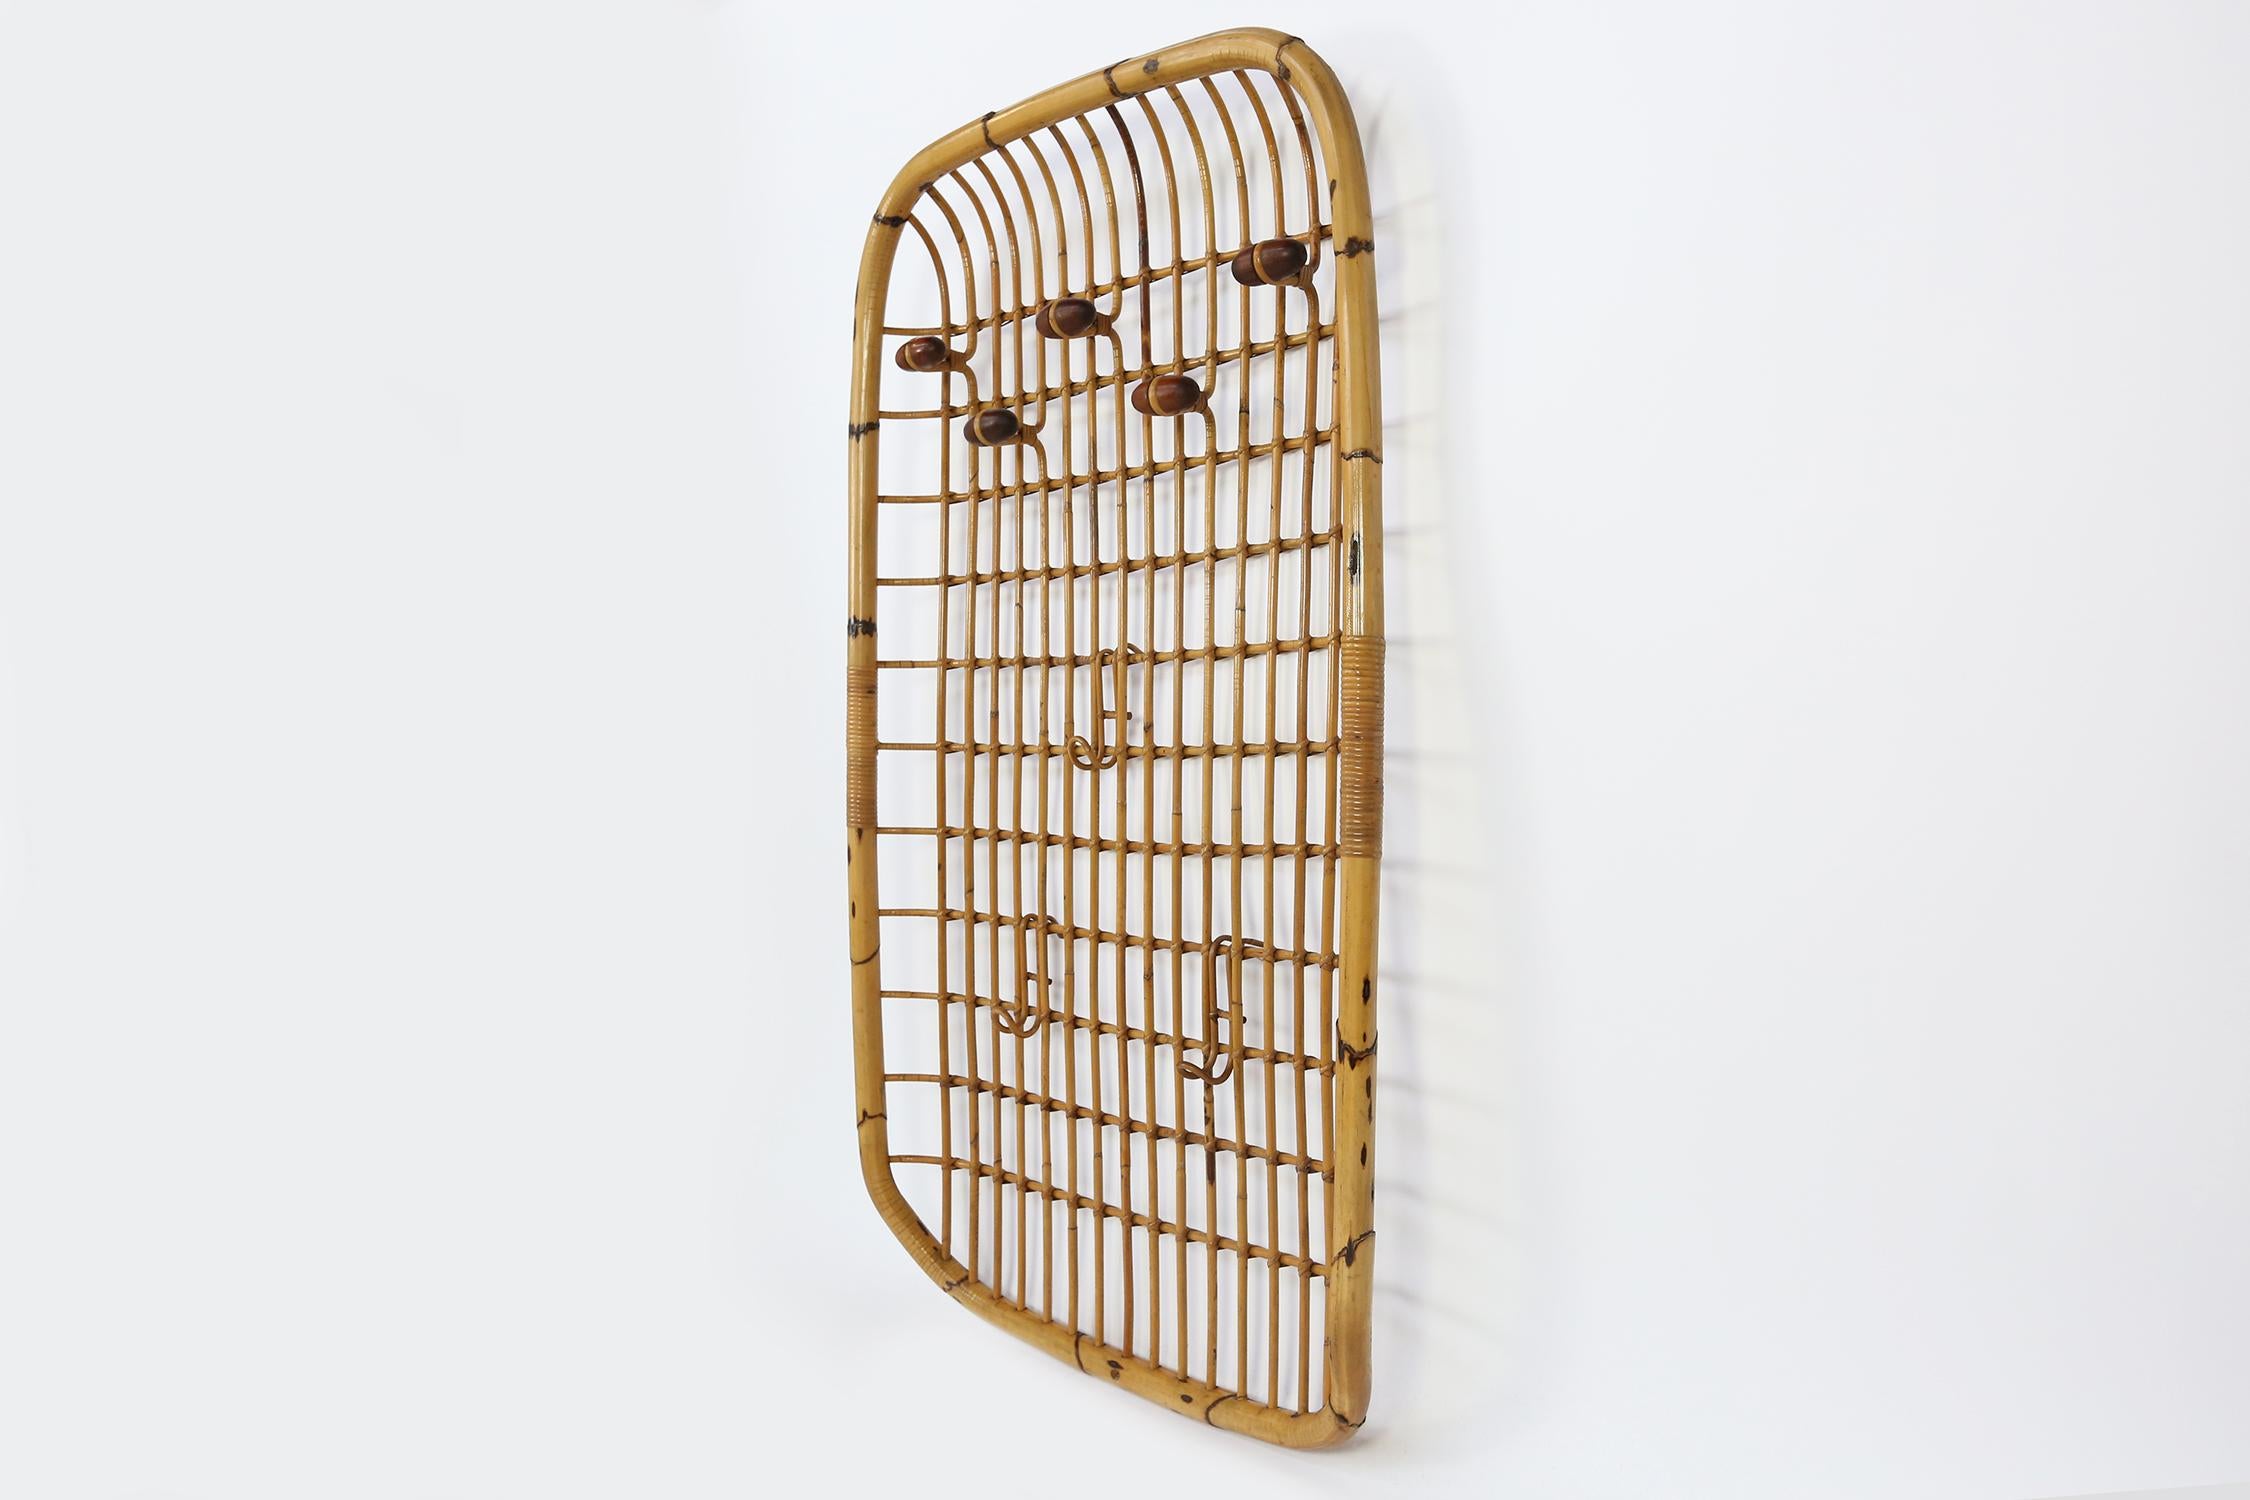 Fantastic rattan wall hanging coat rack by Olaf von Bohr.
Five horizontal wooden hooks with 3 interlocking rattan hooks that can moved where needed.
Great shape and patina.